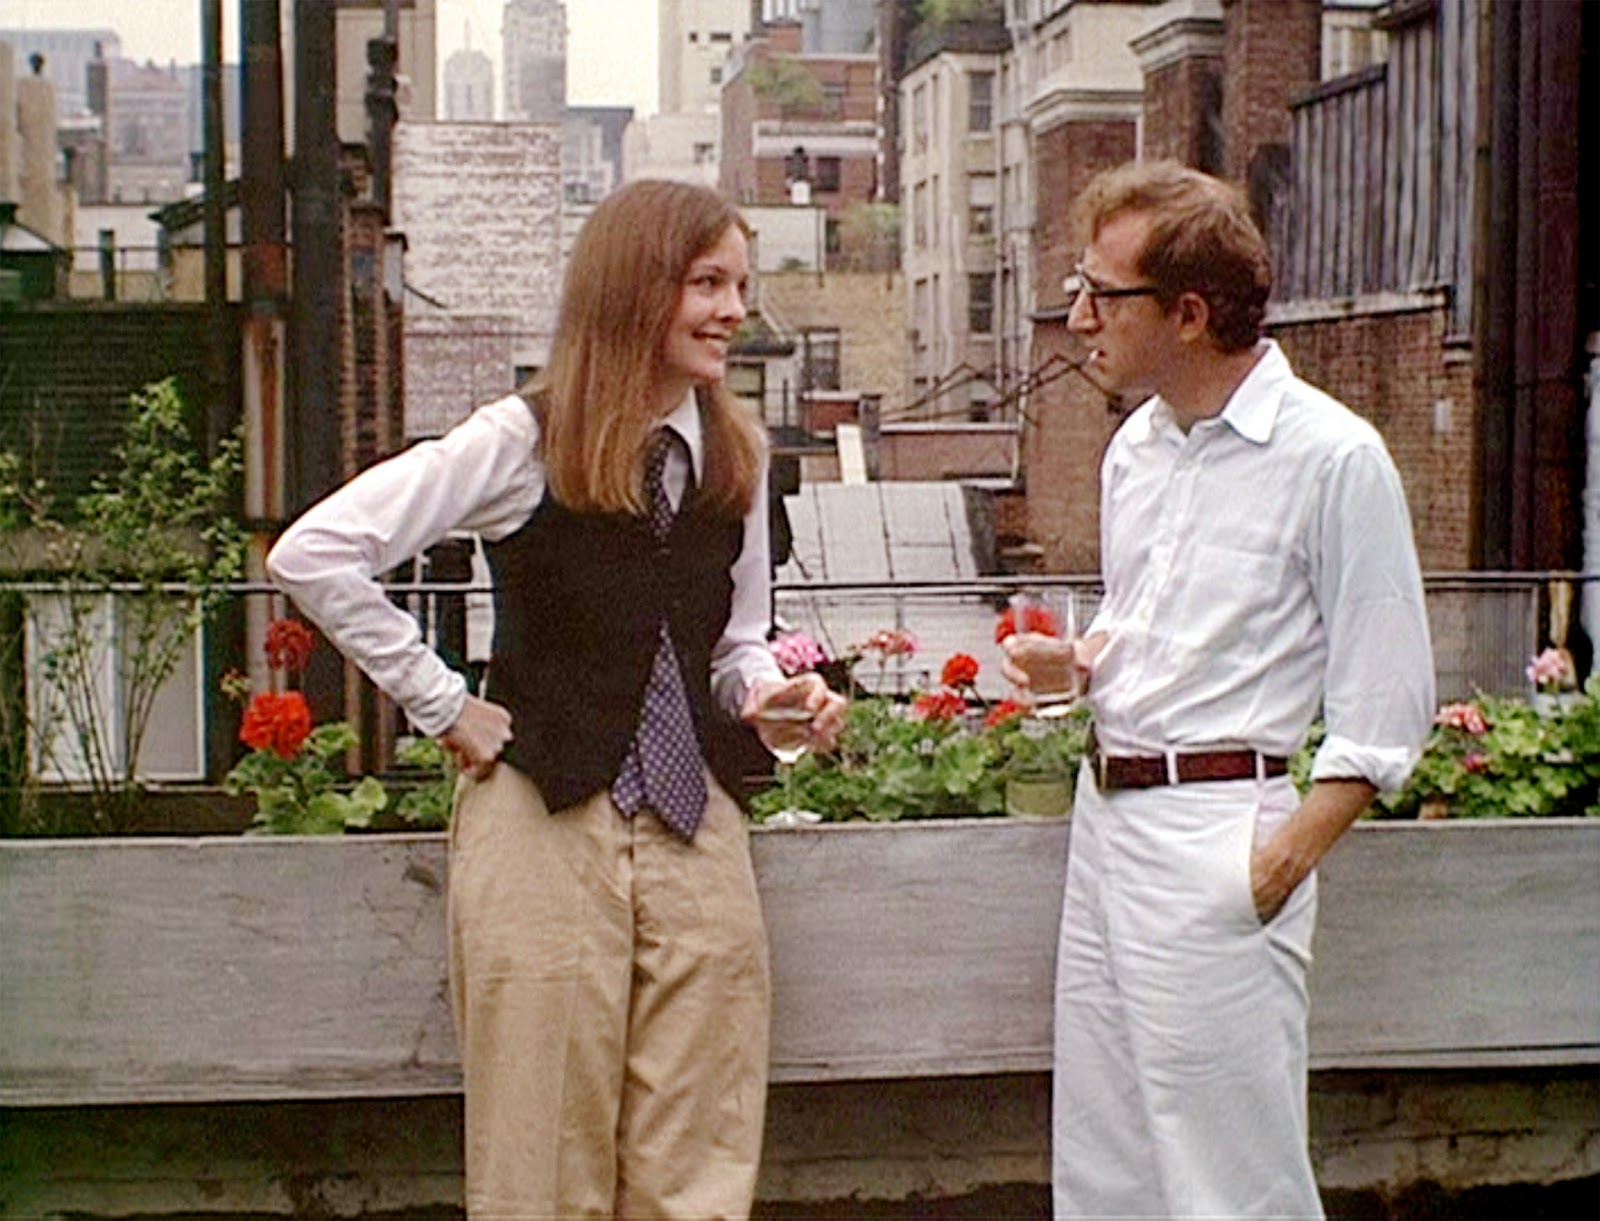 Annie Hall (1977) - Rank as 31st on the AFI’s top feature films of all time, Annie Hall is a wonderful comedy about love, relationships and loss by writer and director Woody Allen. Diane Keaton plays the original “manic pixie dream girl” in this film.